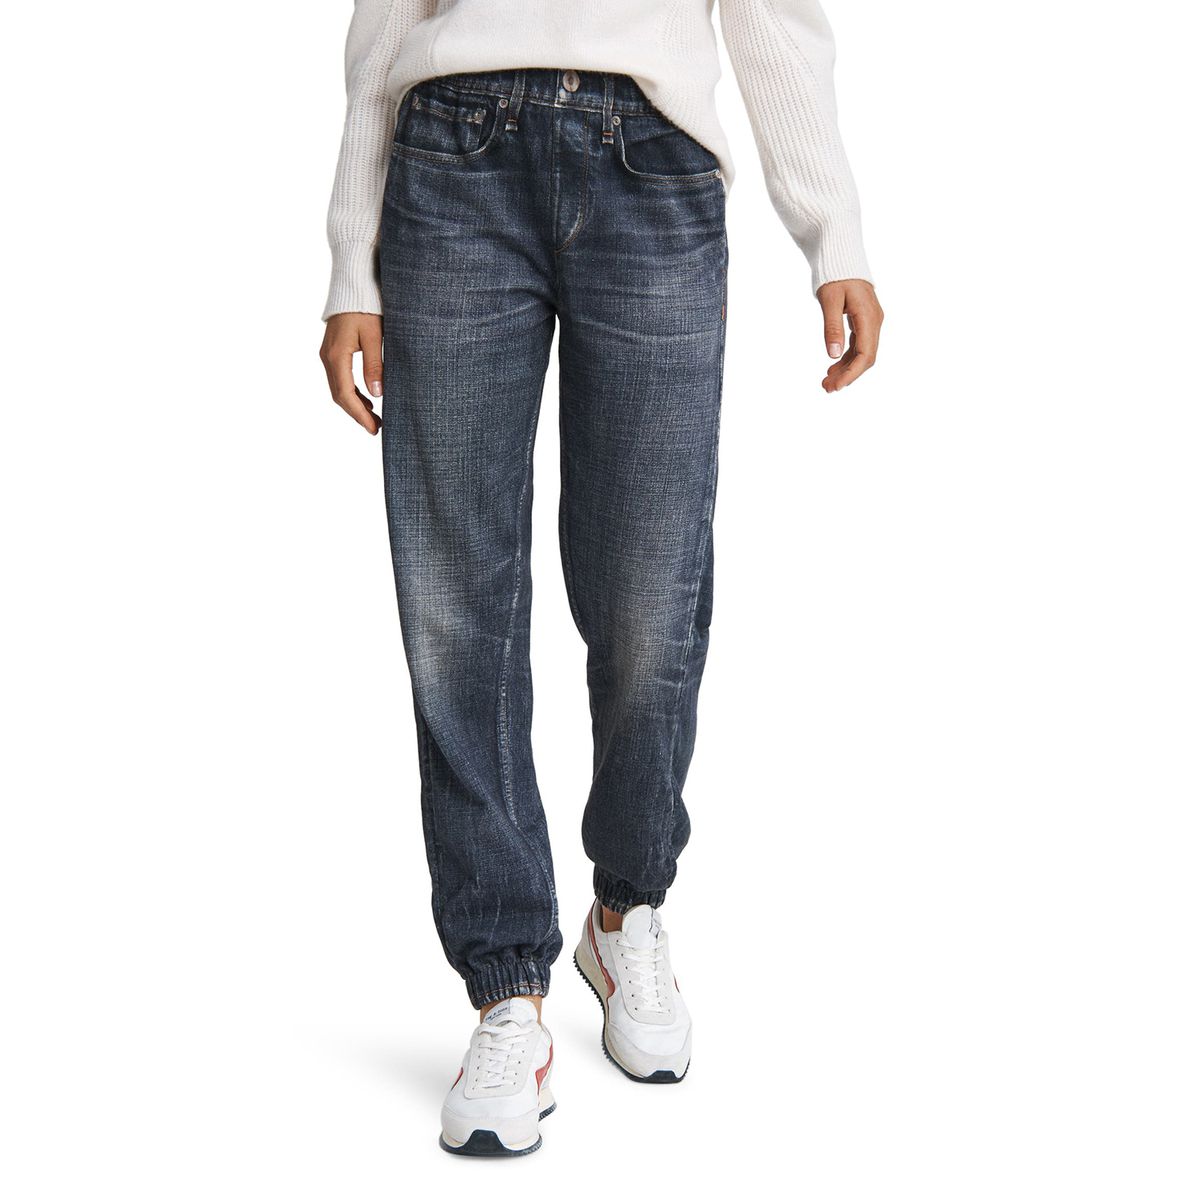 Nordstrom Jeans Joggers